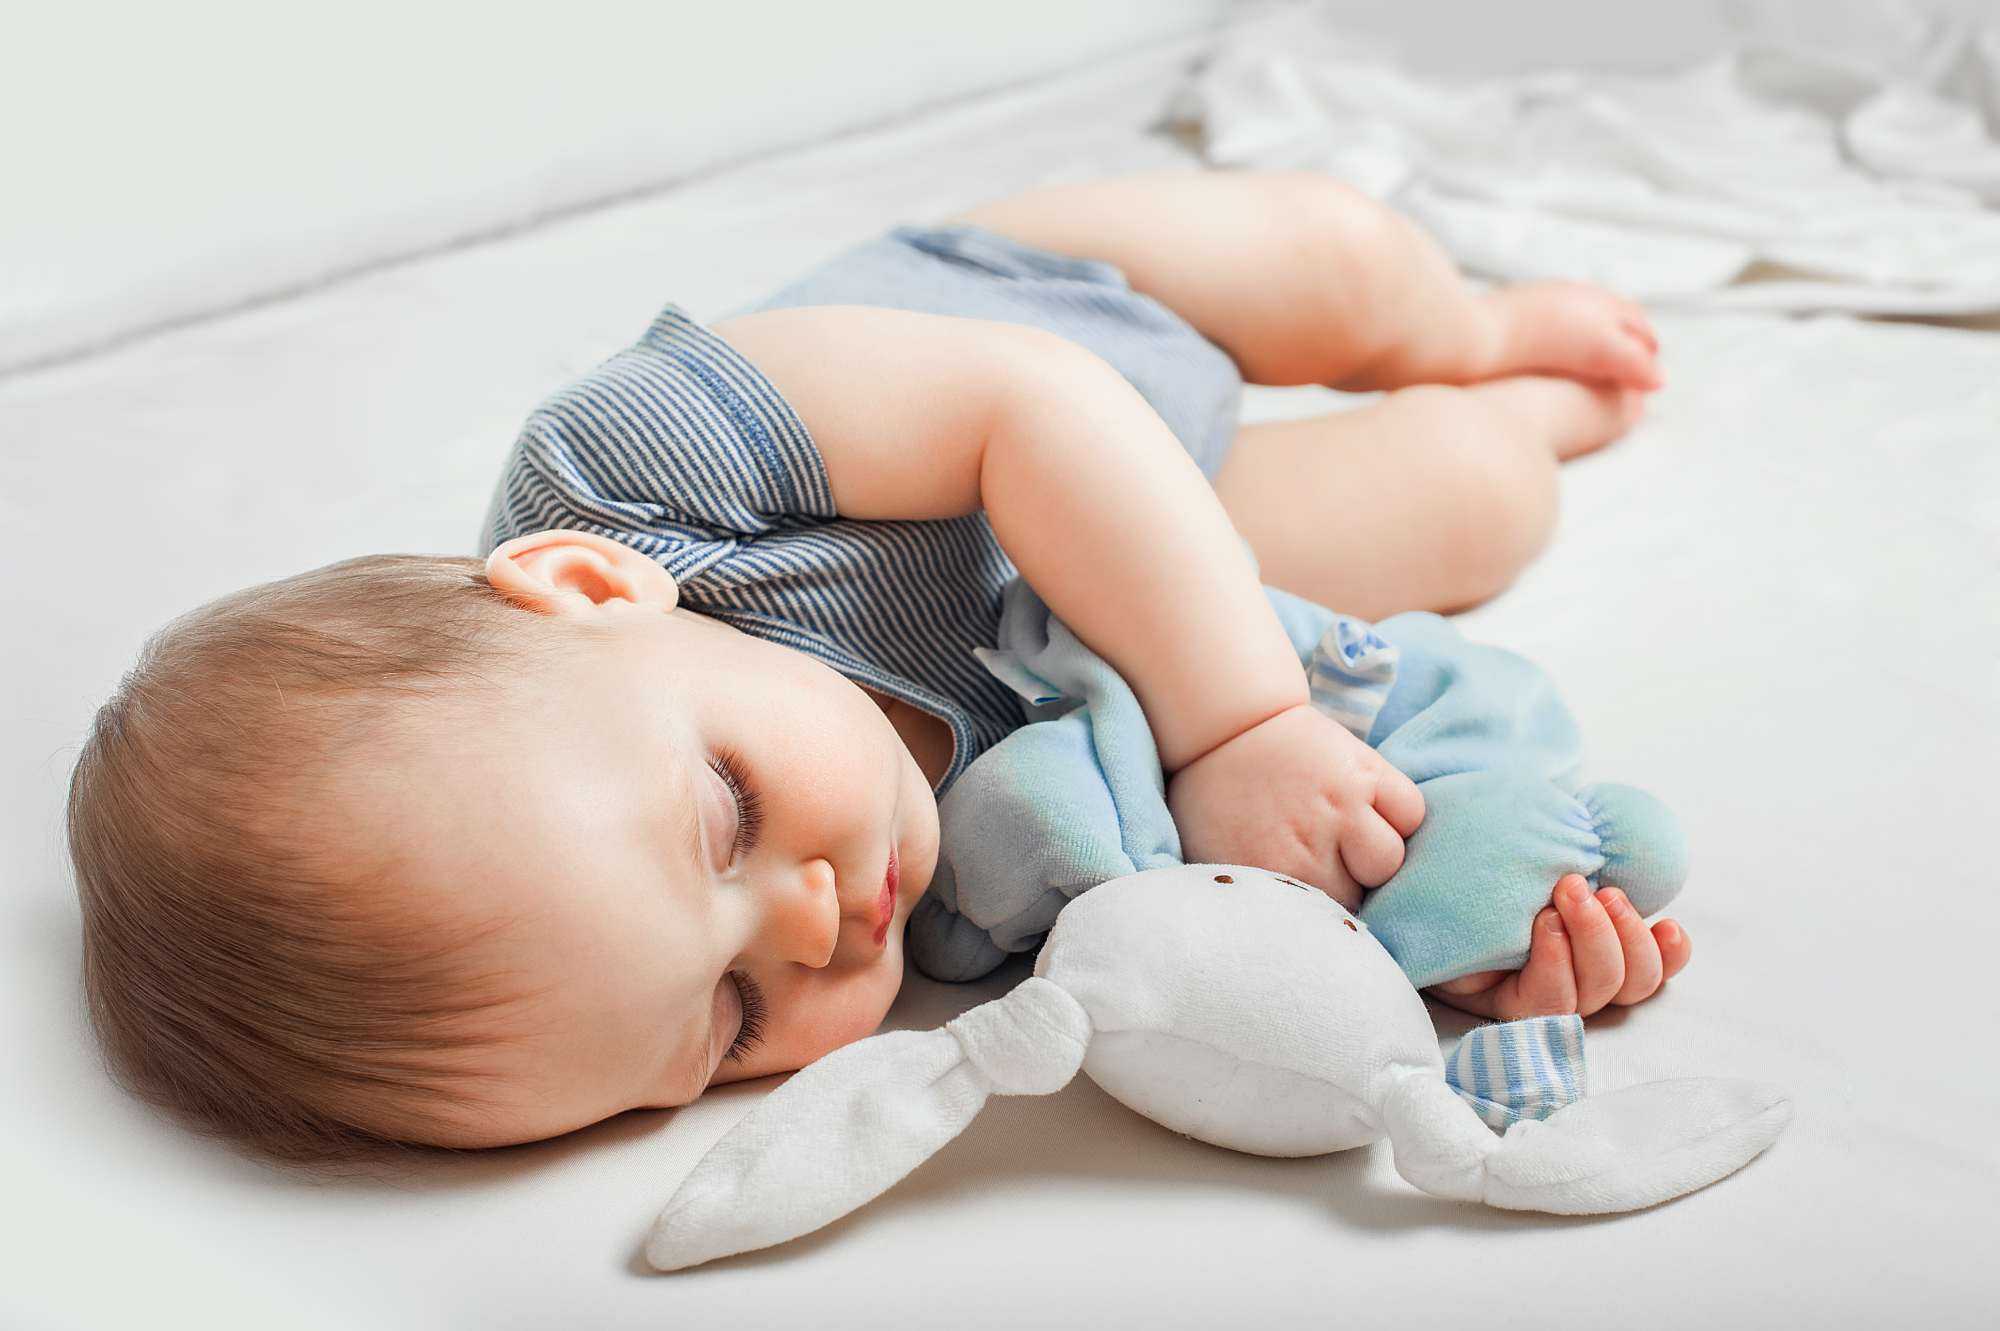 Newborn Sleeping Patterns: What Parents Need to Know